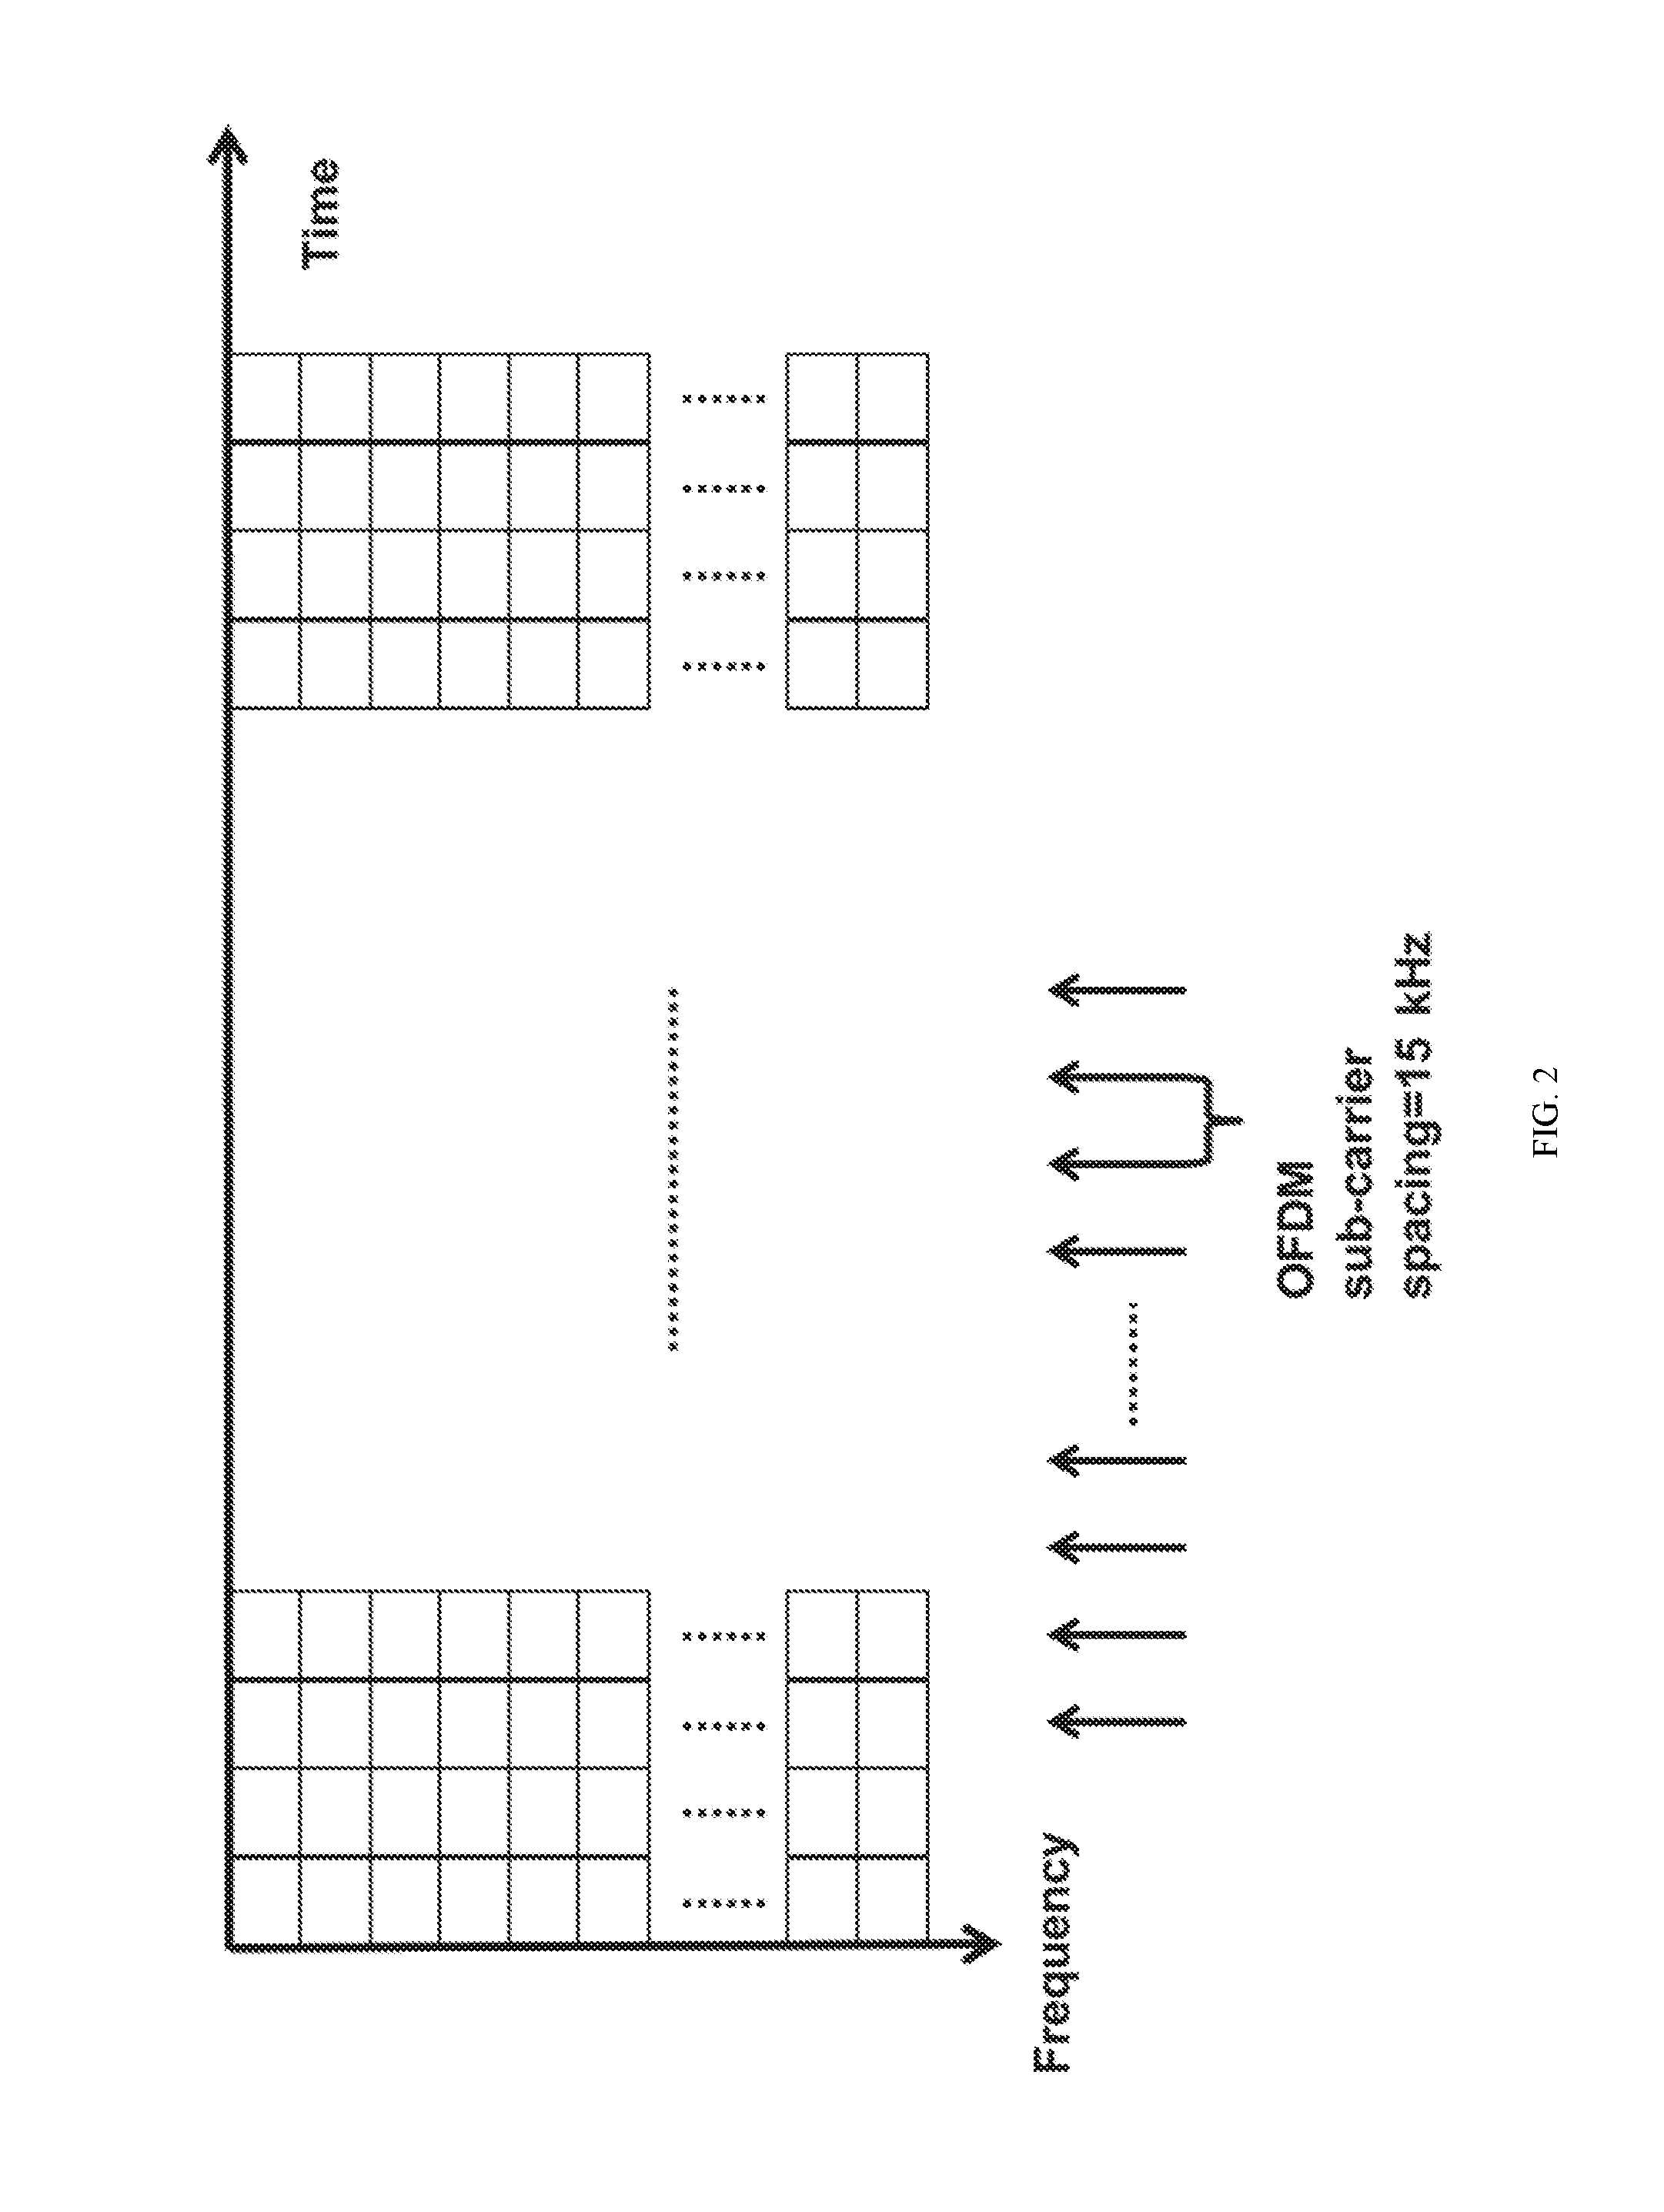 Systems and Methods for OFDM with Flexible Sub-Carrier Spacing and Symbol Duration